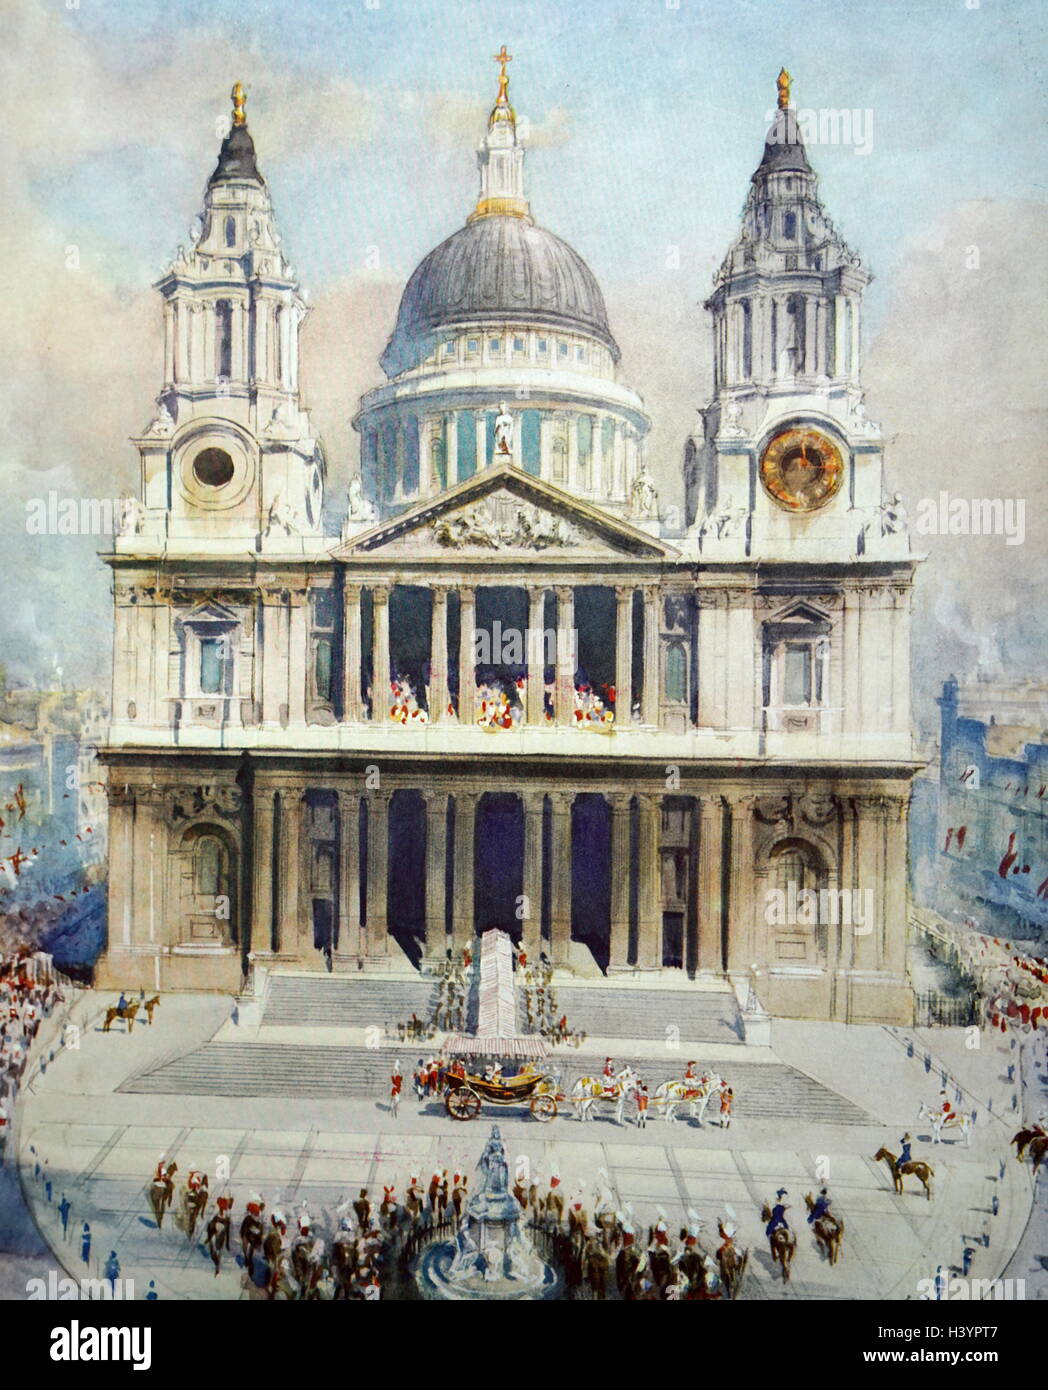 Silver Jubilee of King George V at St Pail's Cathedral, London, 1935